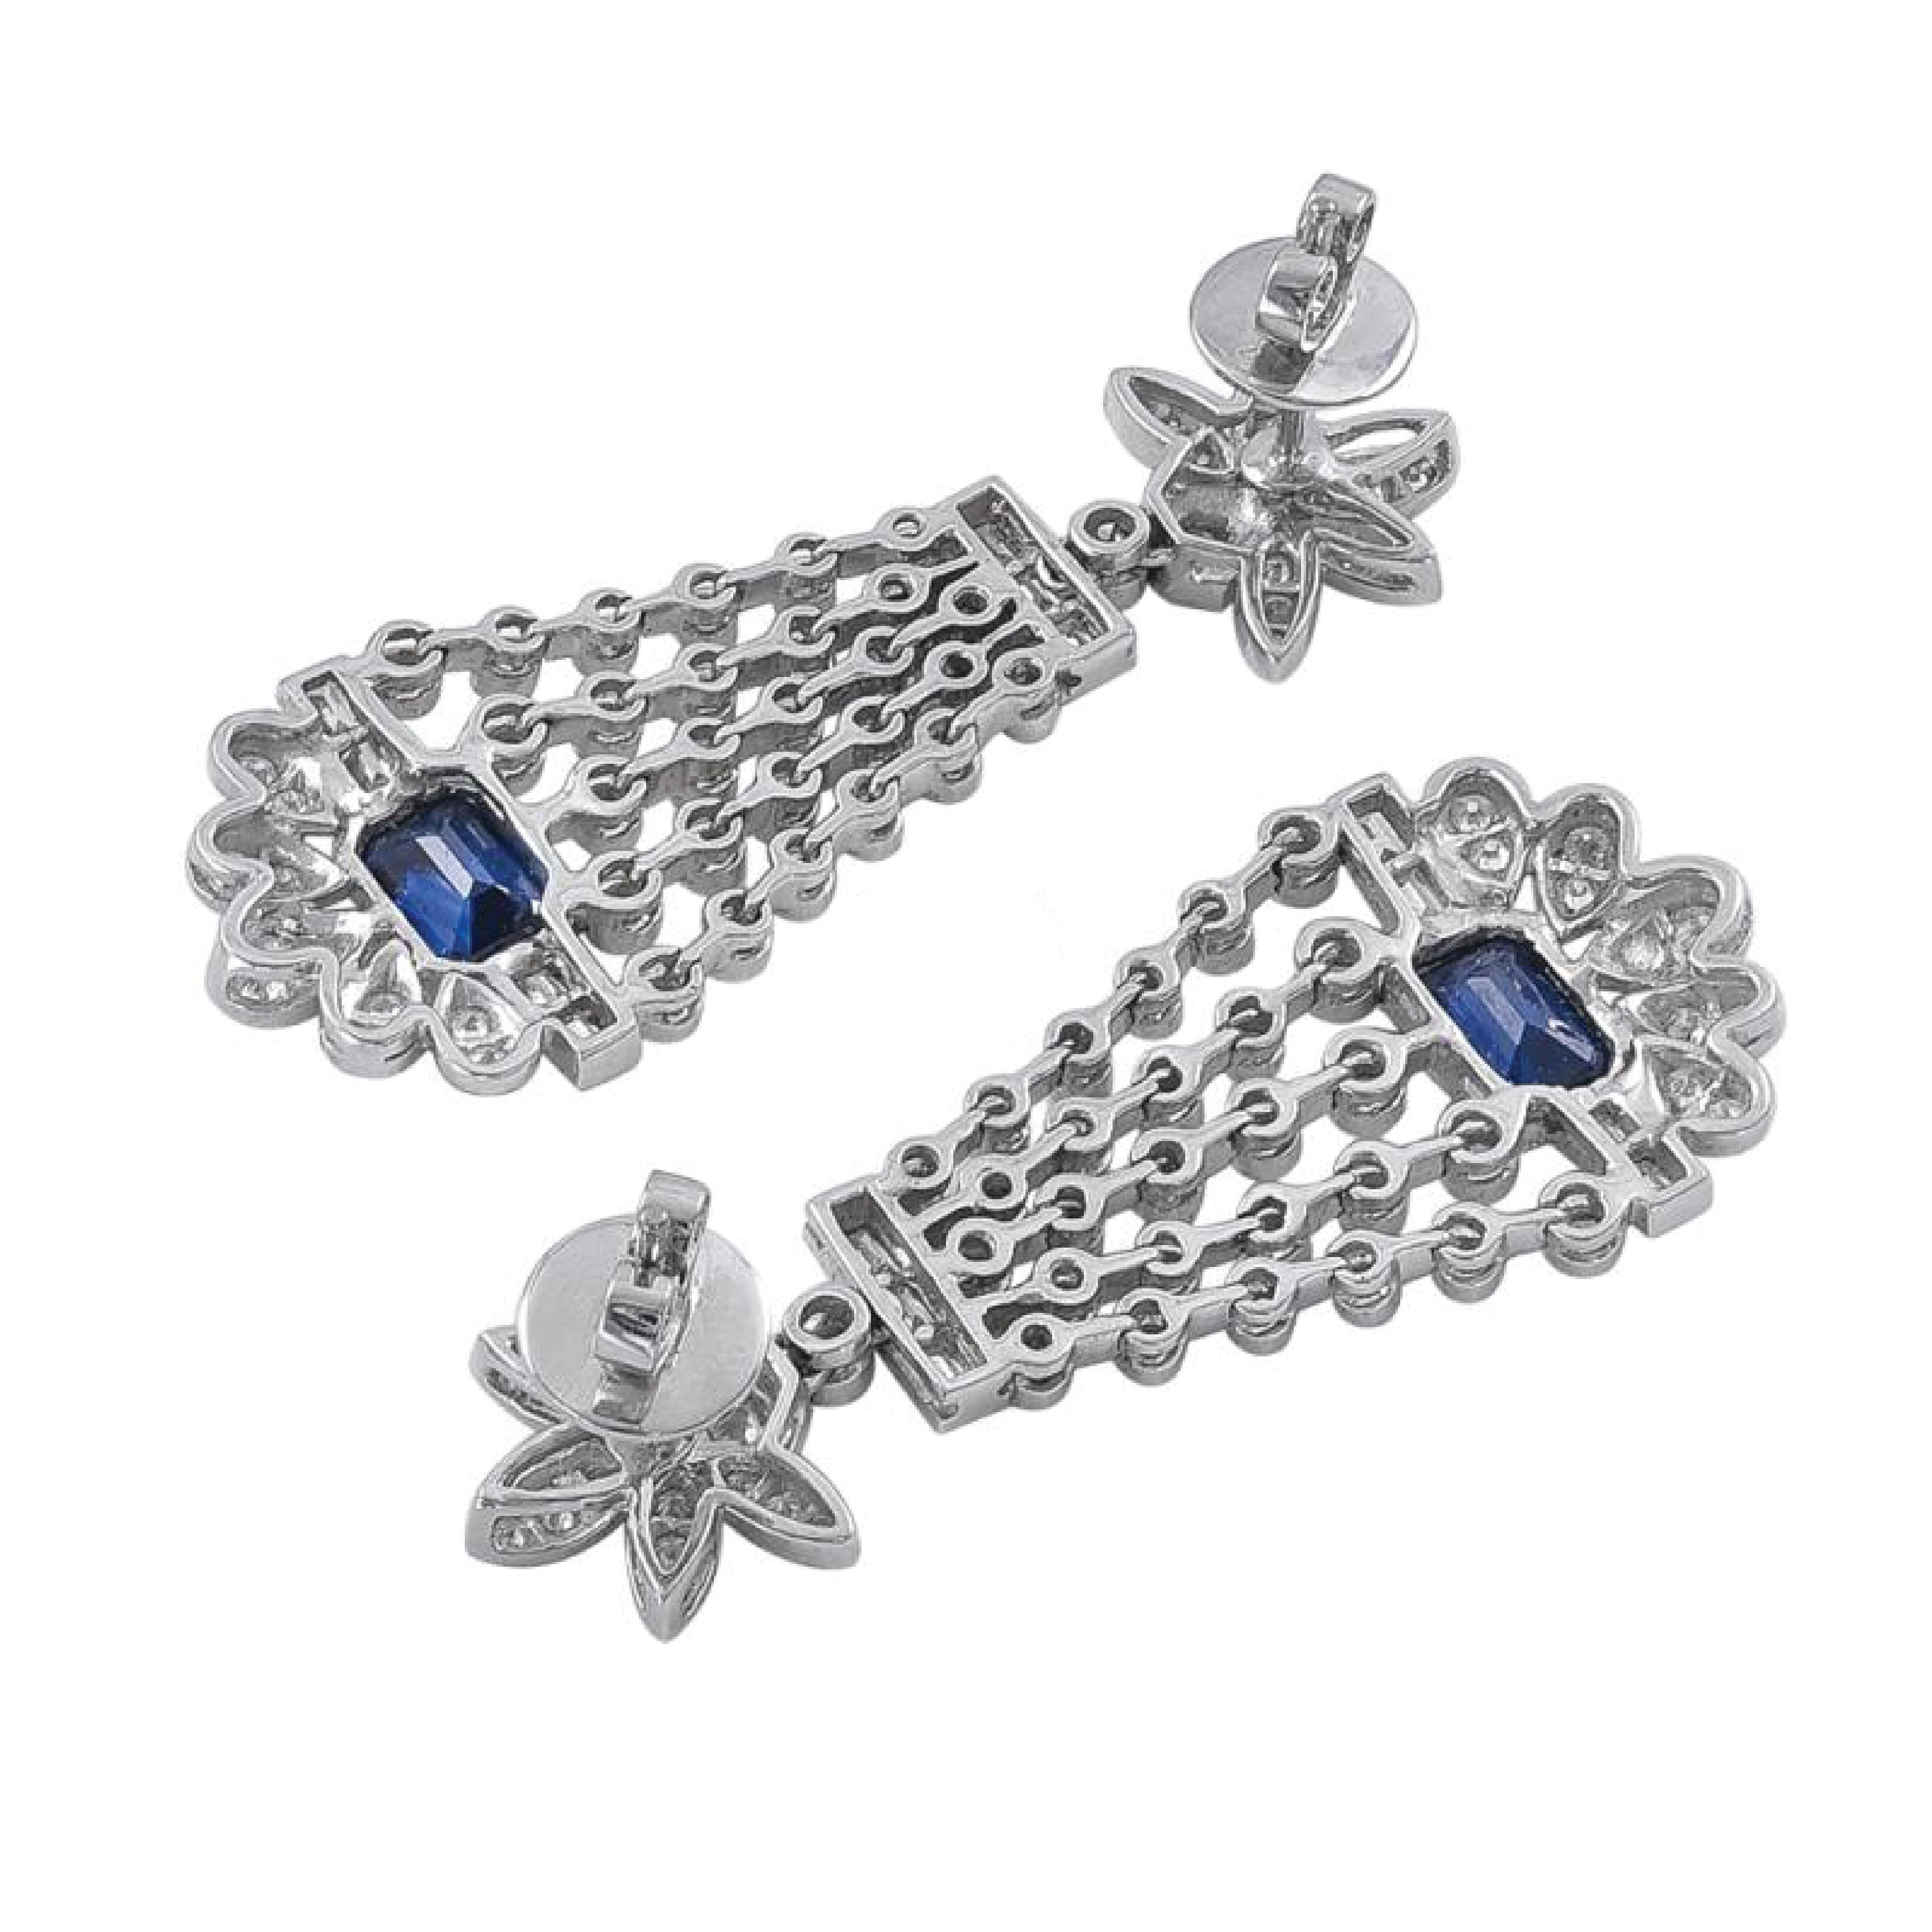 Unique and modern designed platinum earrings that features a sapphire center weighing 1.83 carats surrounded by gorgeous fancy cut diamonds weighing a total 2.47 carats.

Sophia D by Joseph Dardashti LTD has been known worldwide for 35 years and are